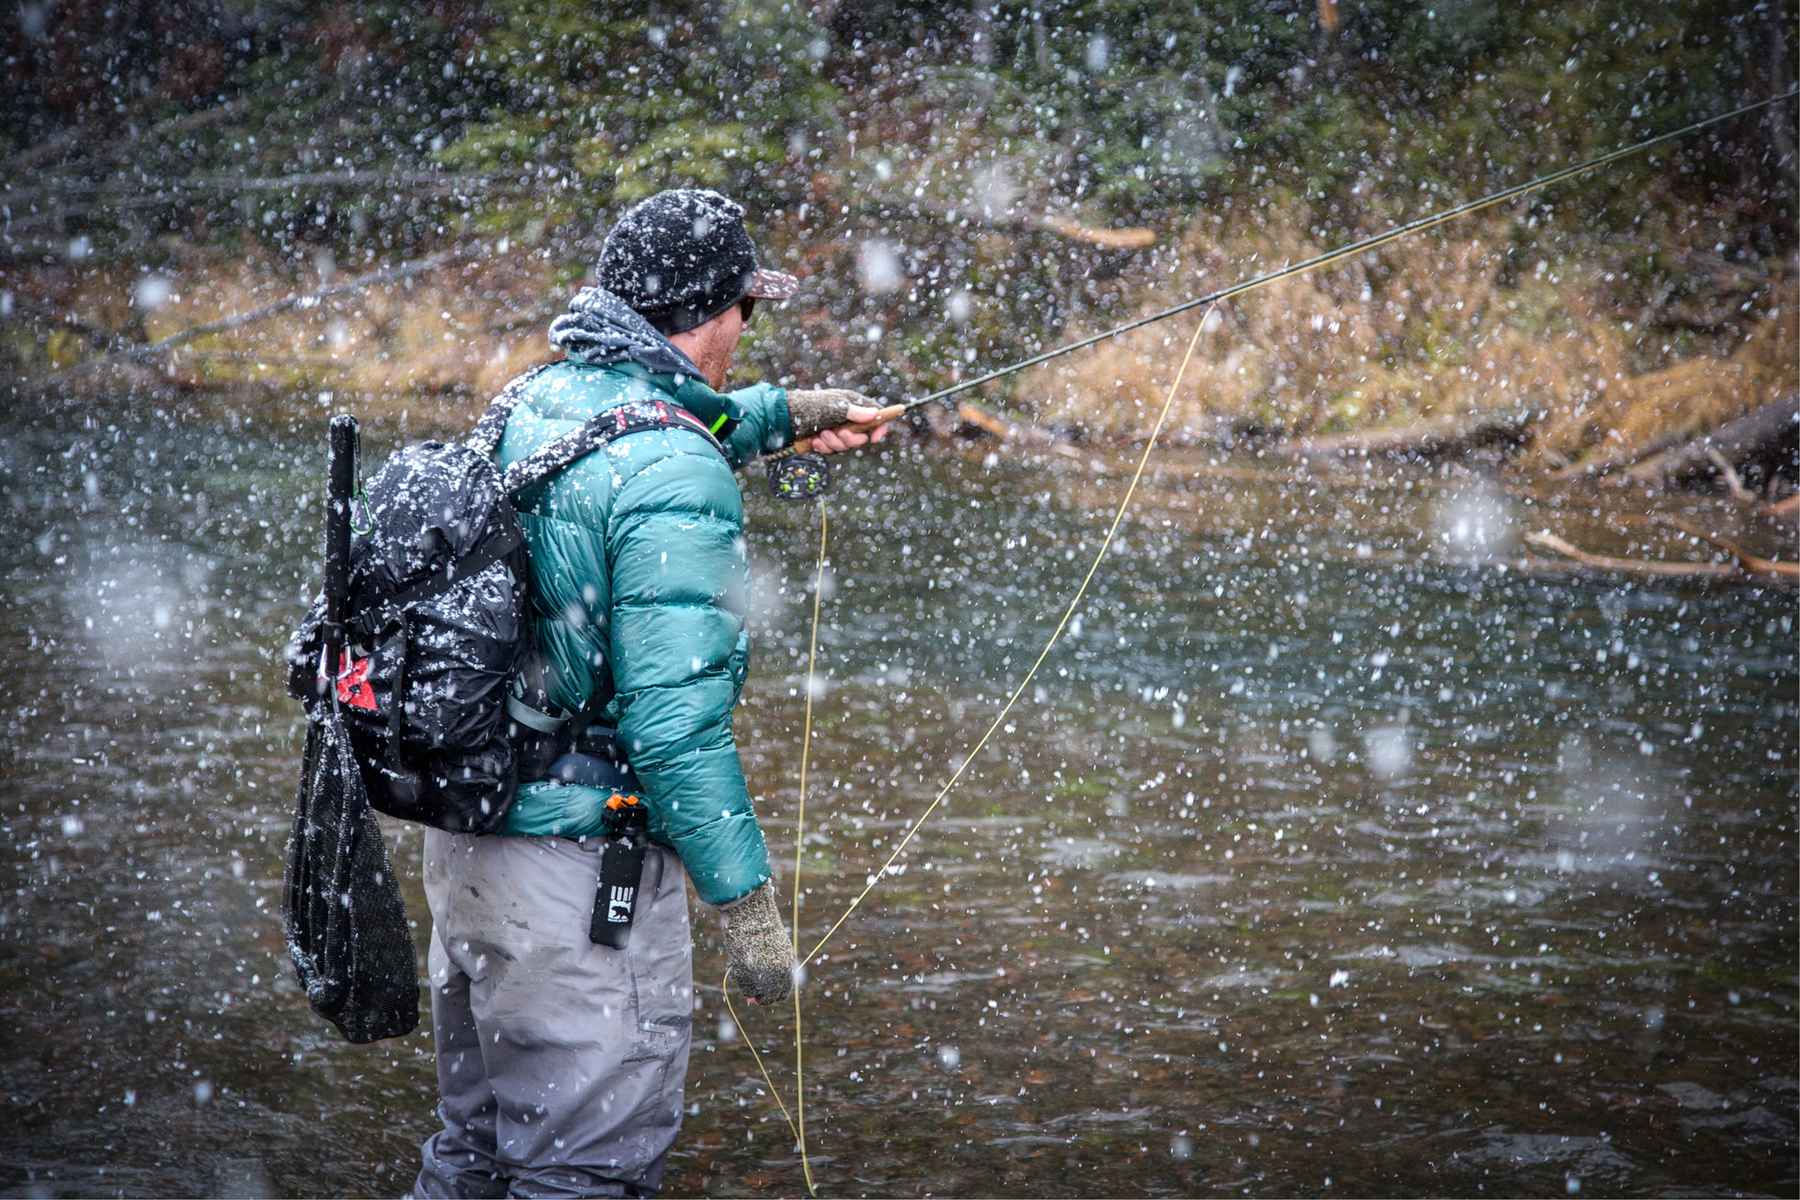 Twas the Day Before Christmas  Hatch Magazine - Fly Fishing, etc.